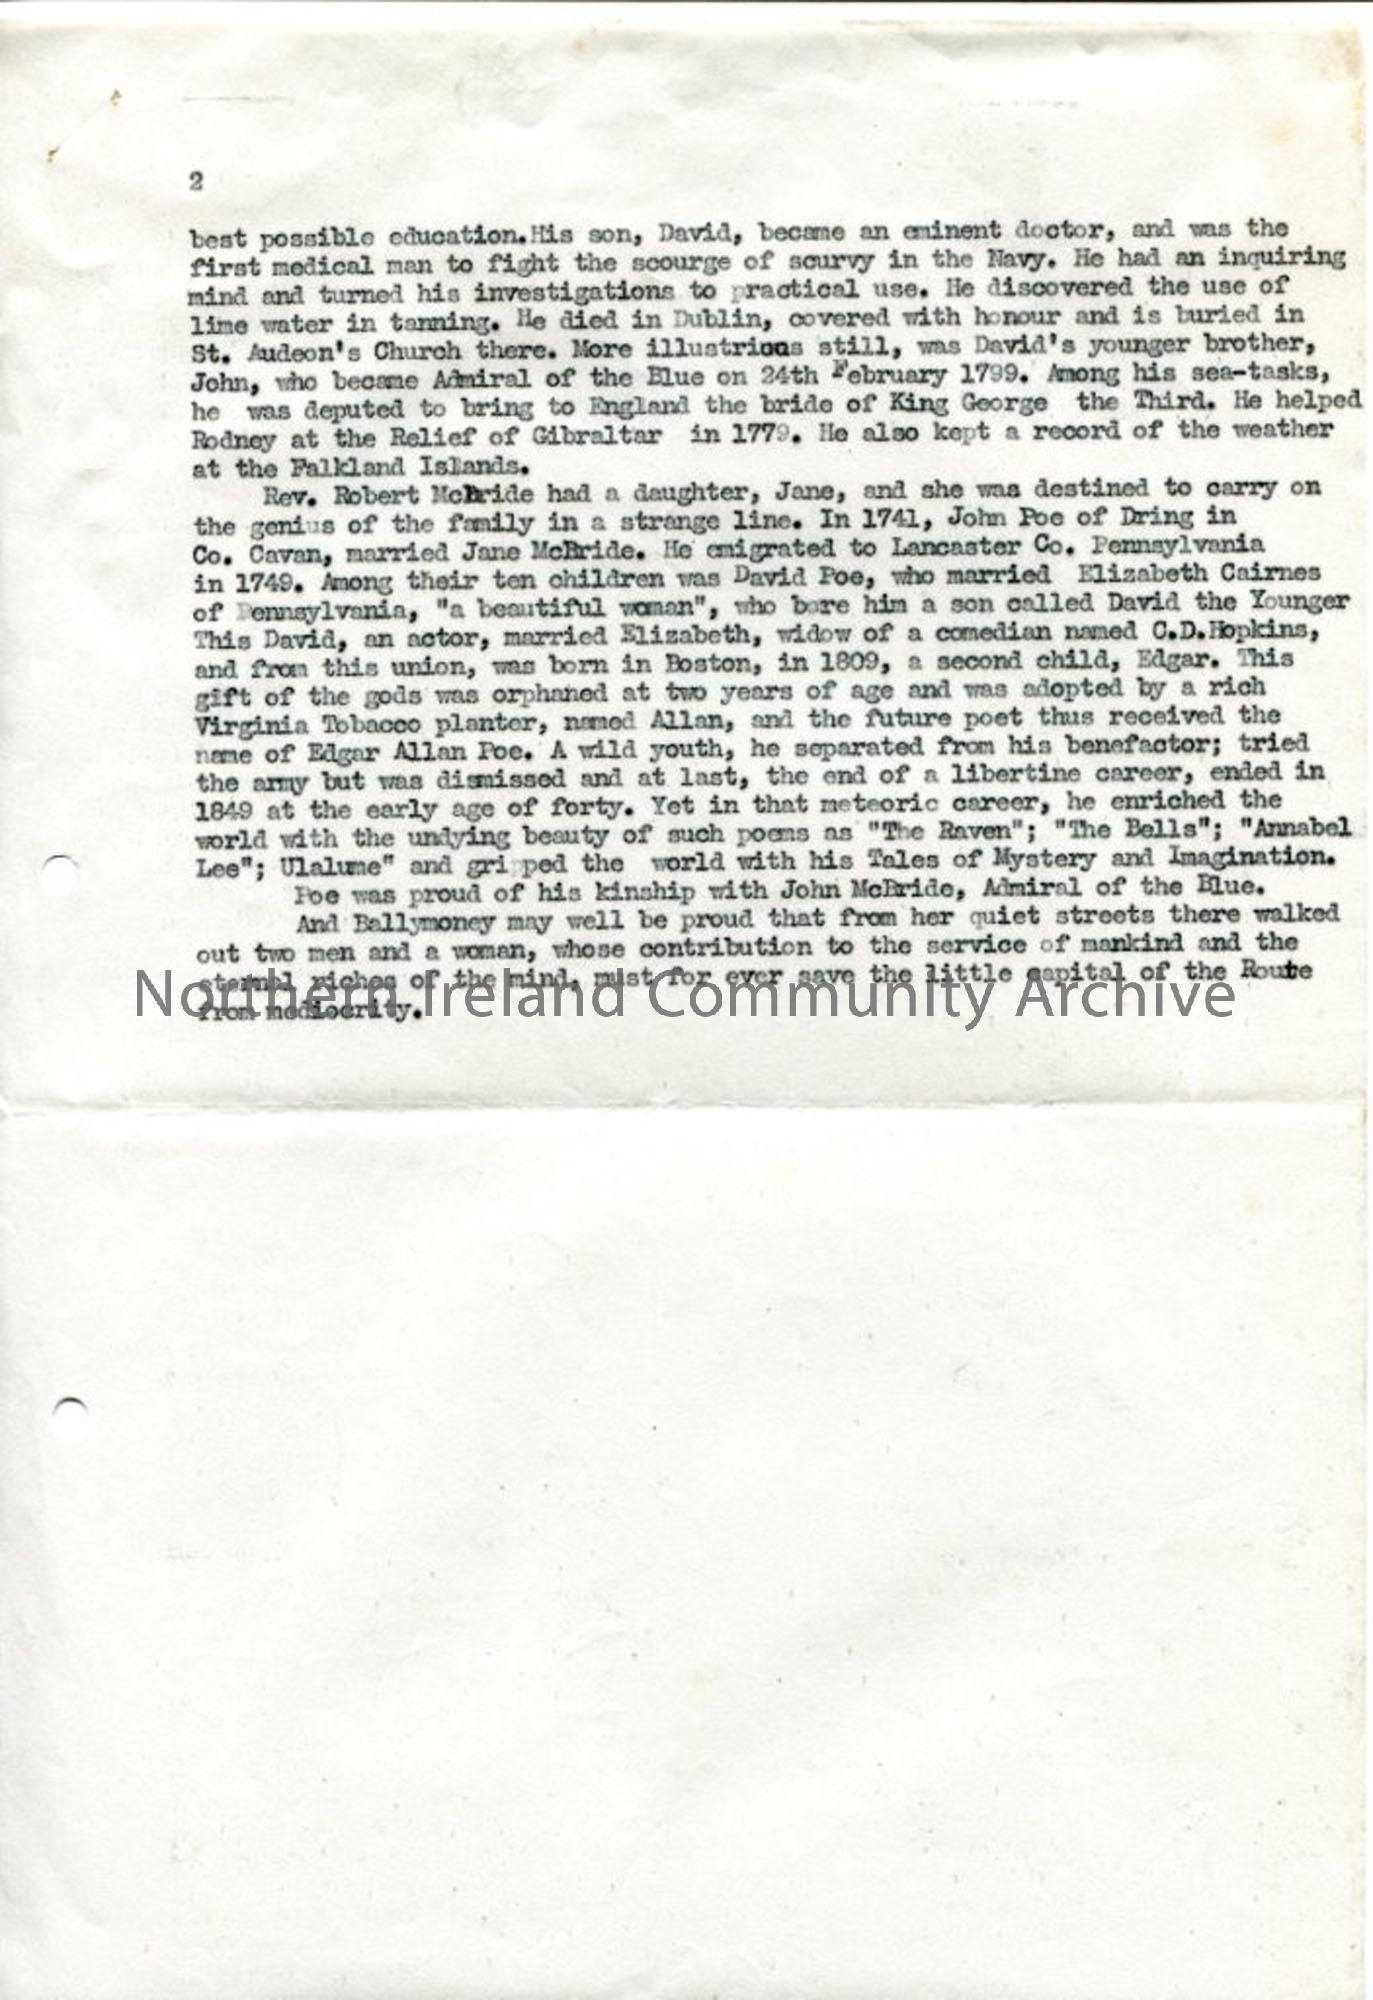 Page 2 of 2: Typed Script on John McBride